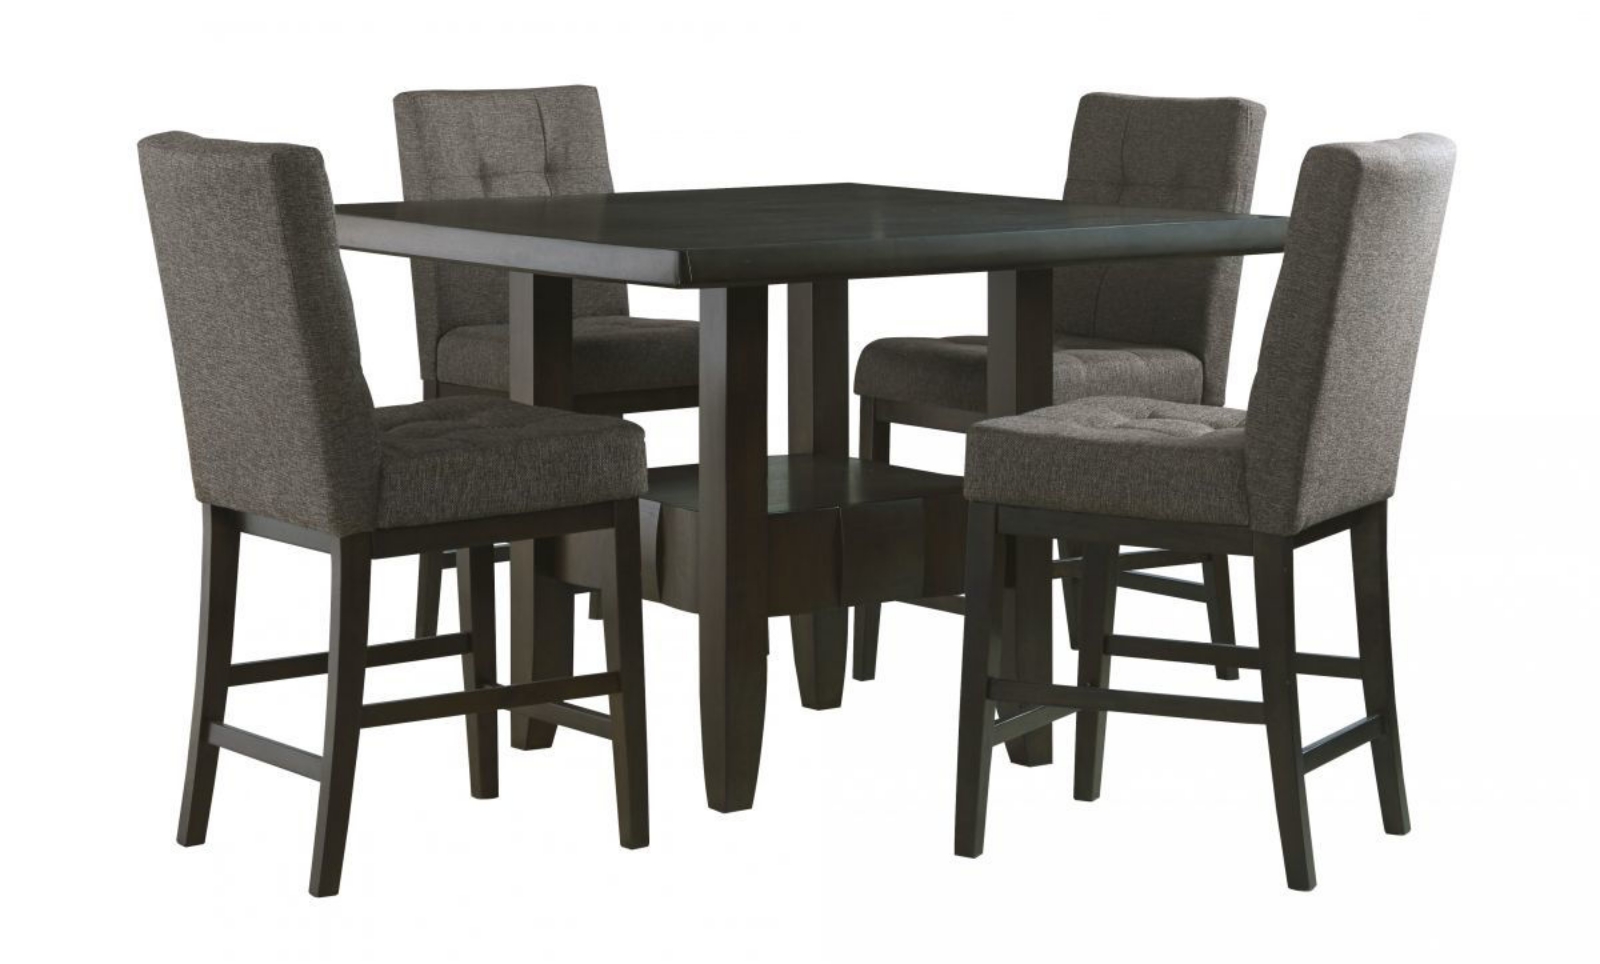 Picture of Chanella Pub Table & 4 Stools